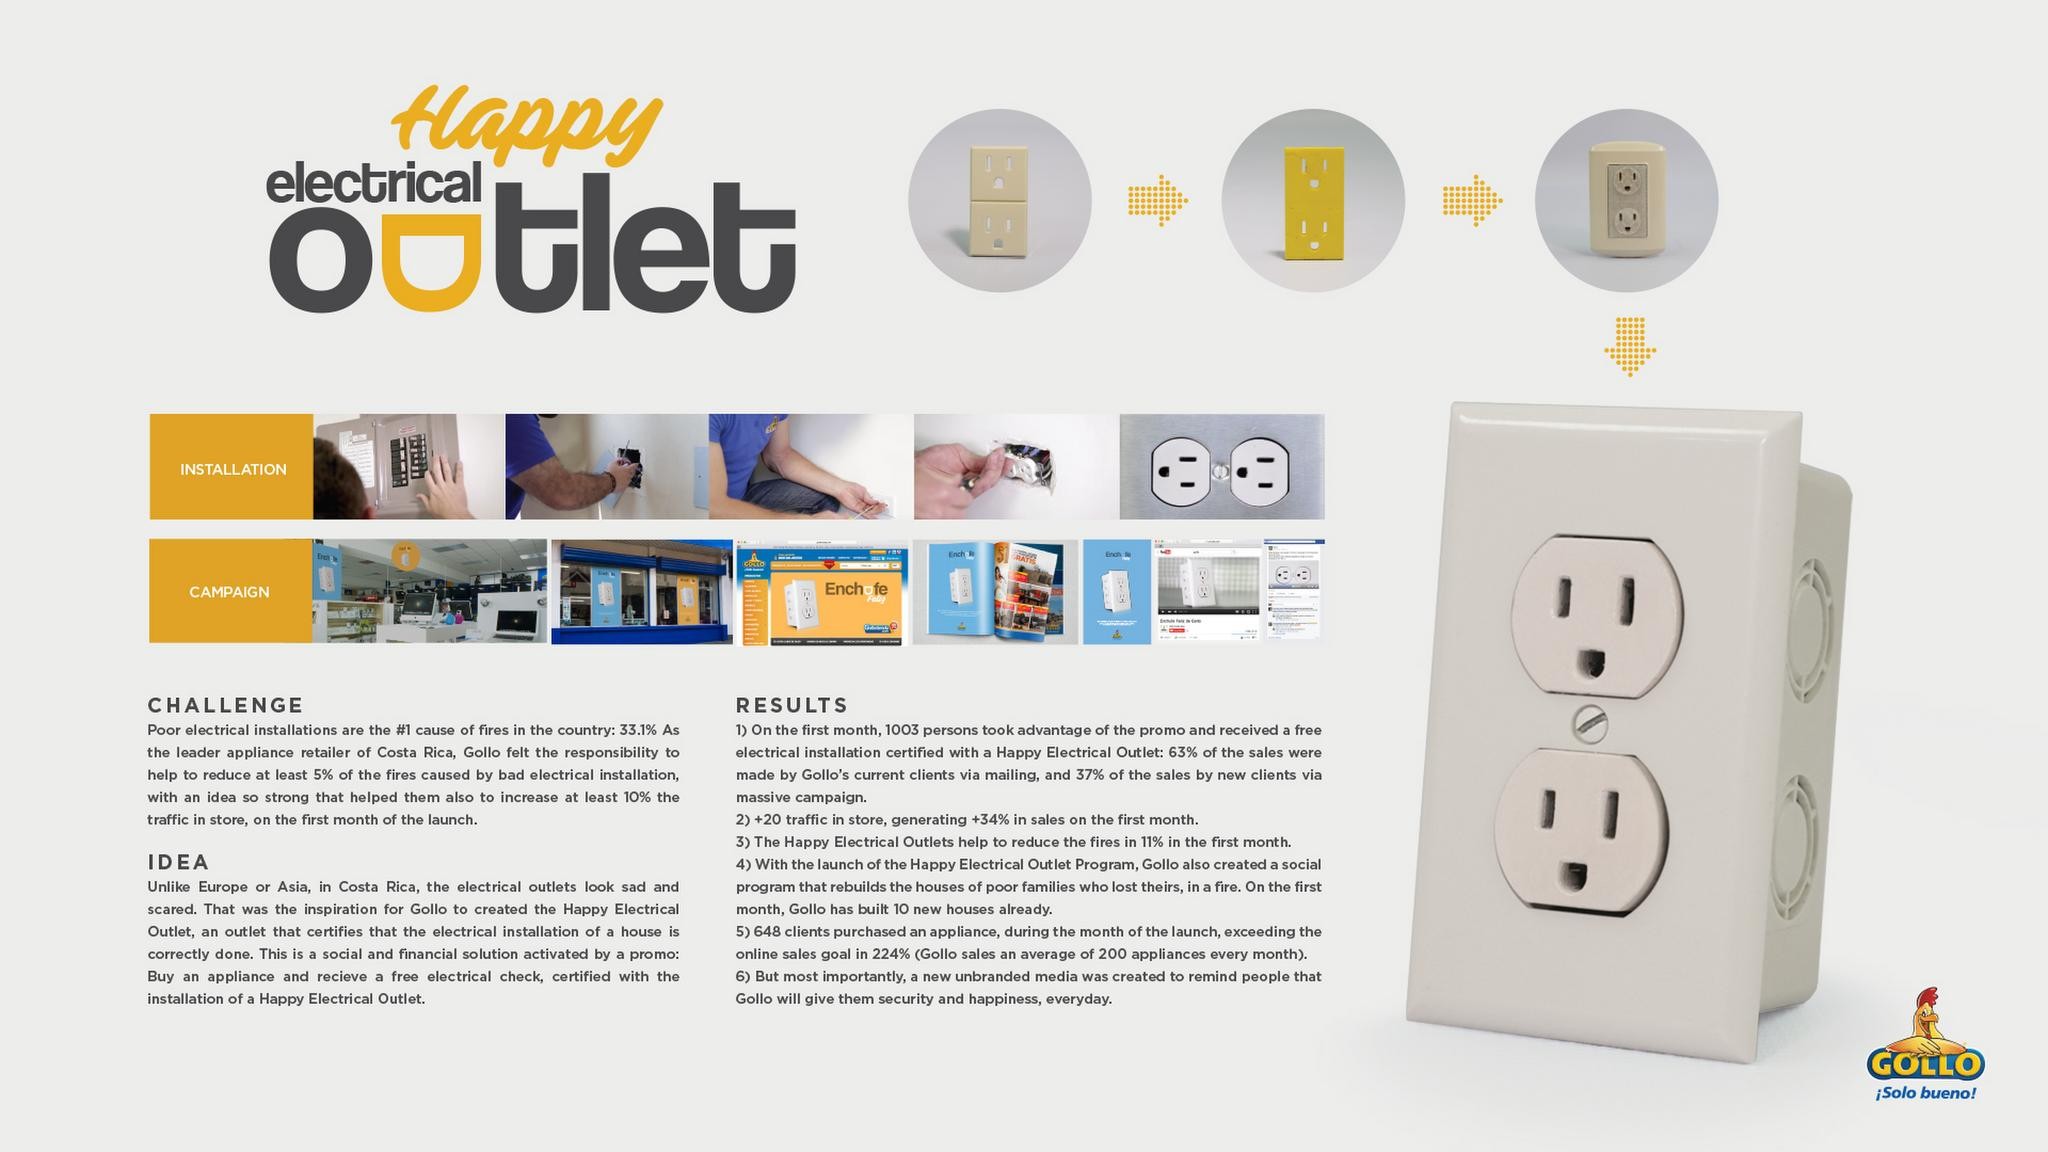 THE HAPPY ELECTRICAL OUTLET